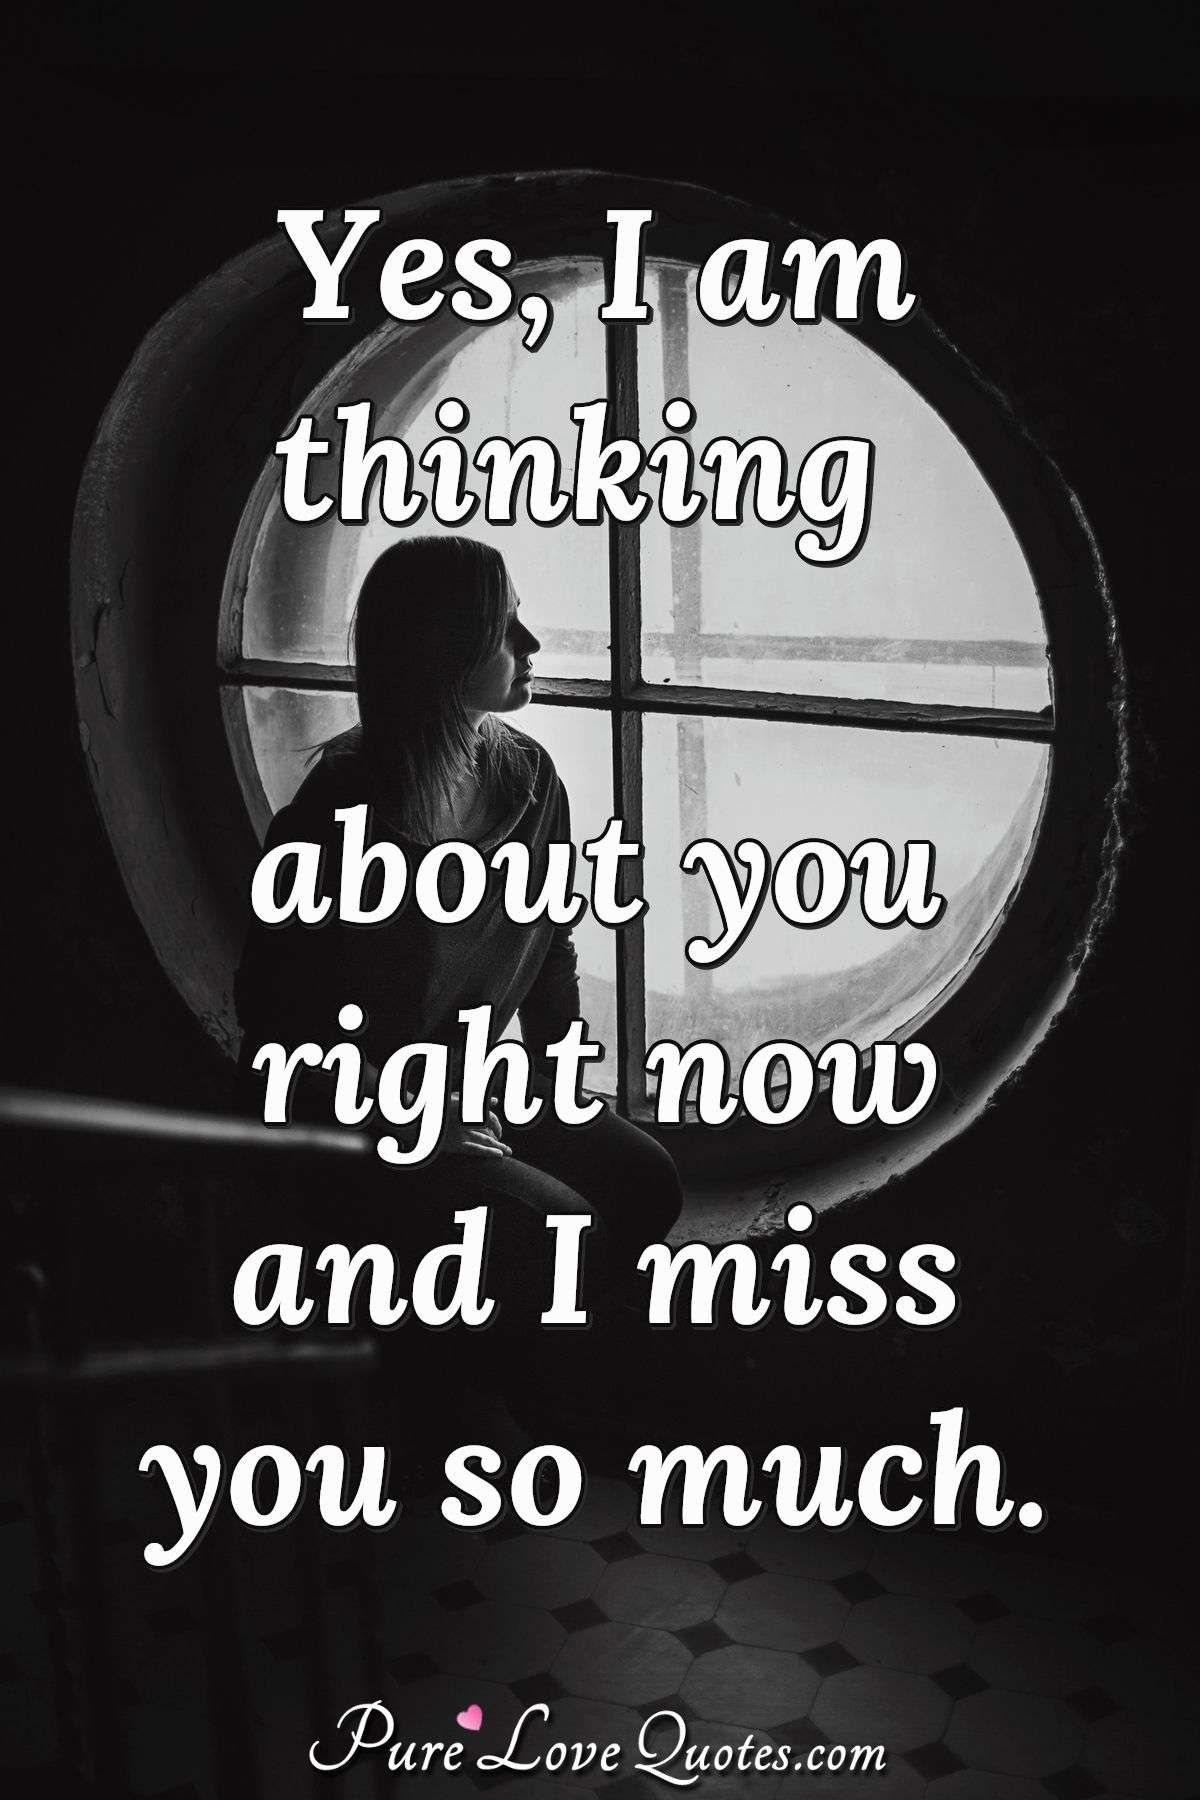 Yes, I am thinking about you right now and I miss you so much. - Anonymous